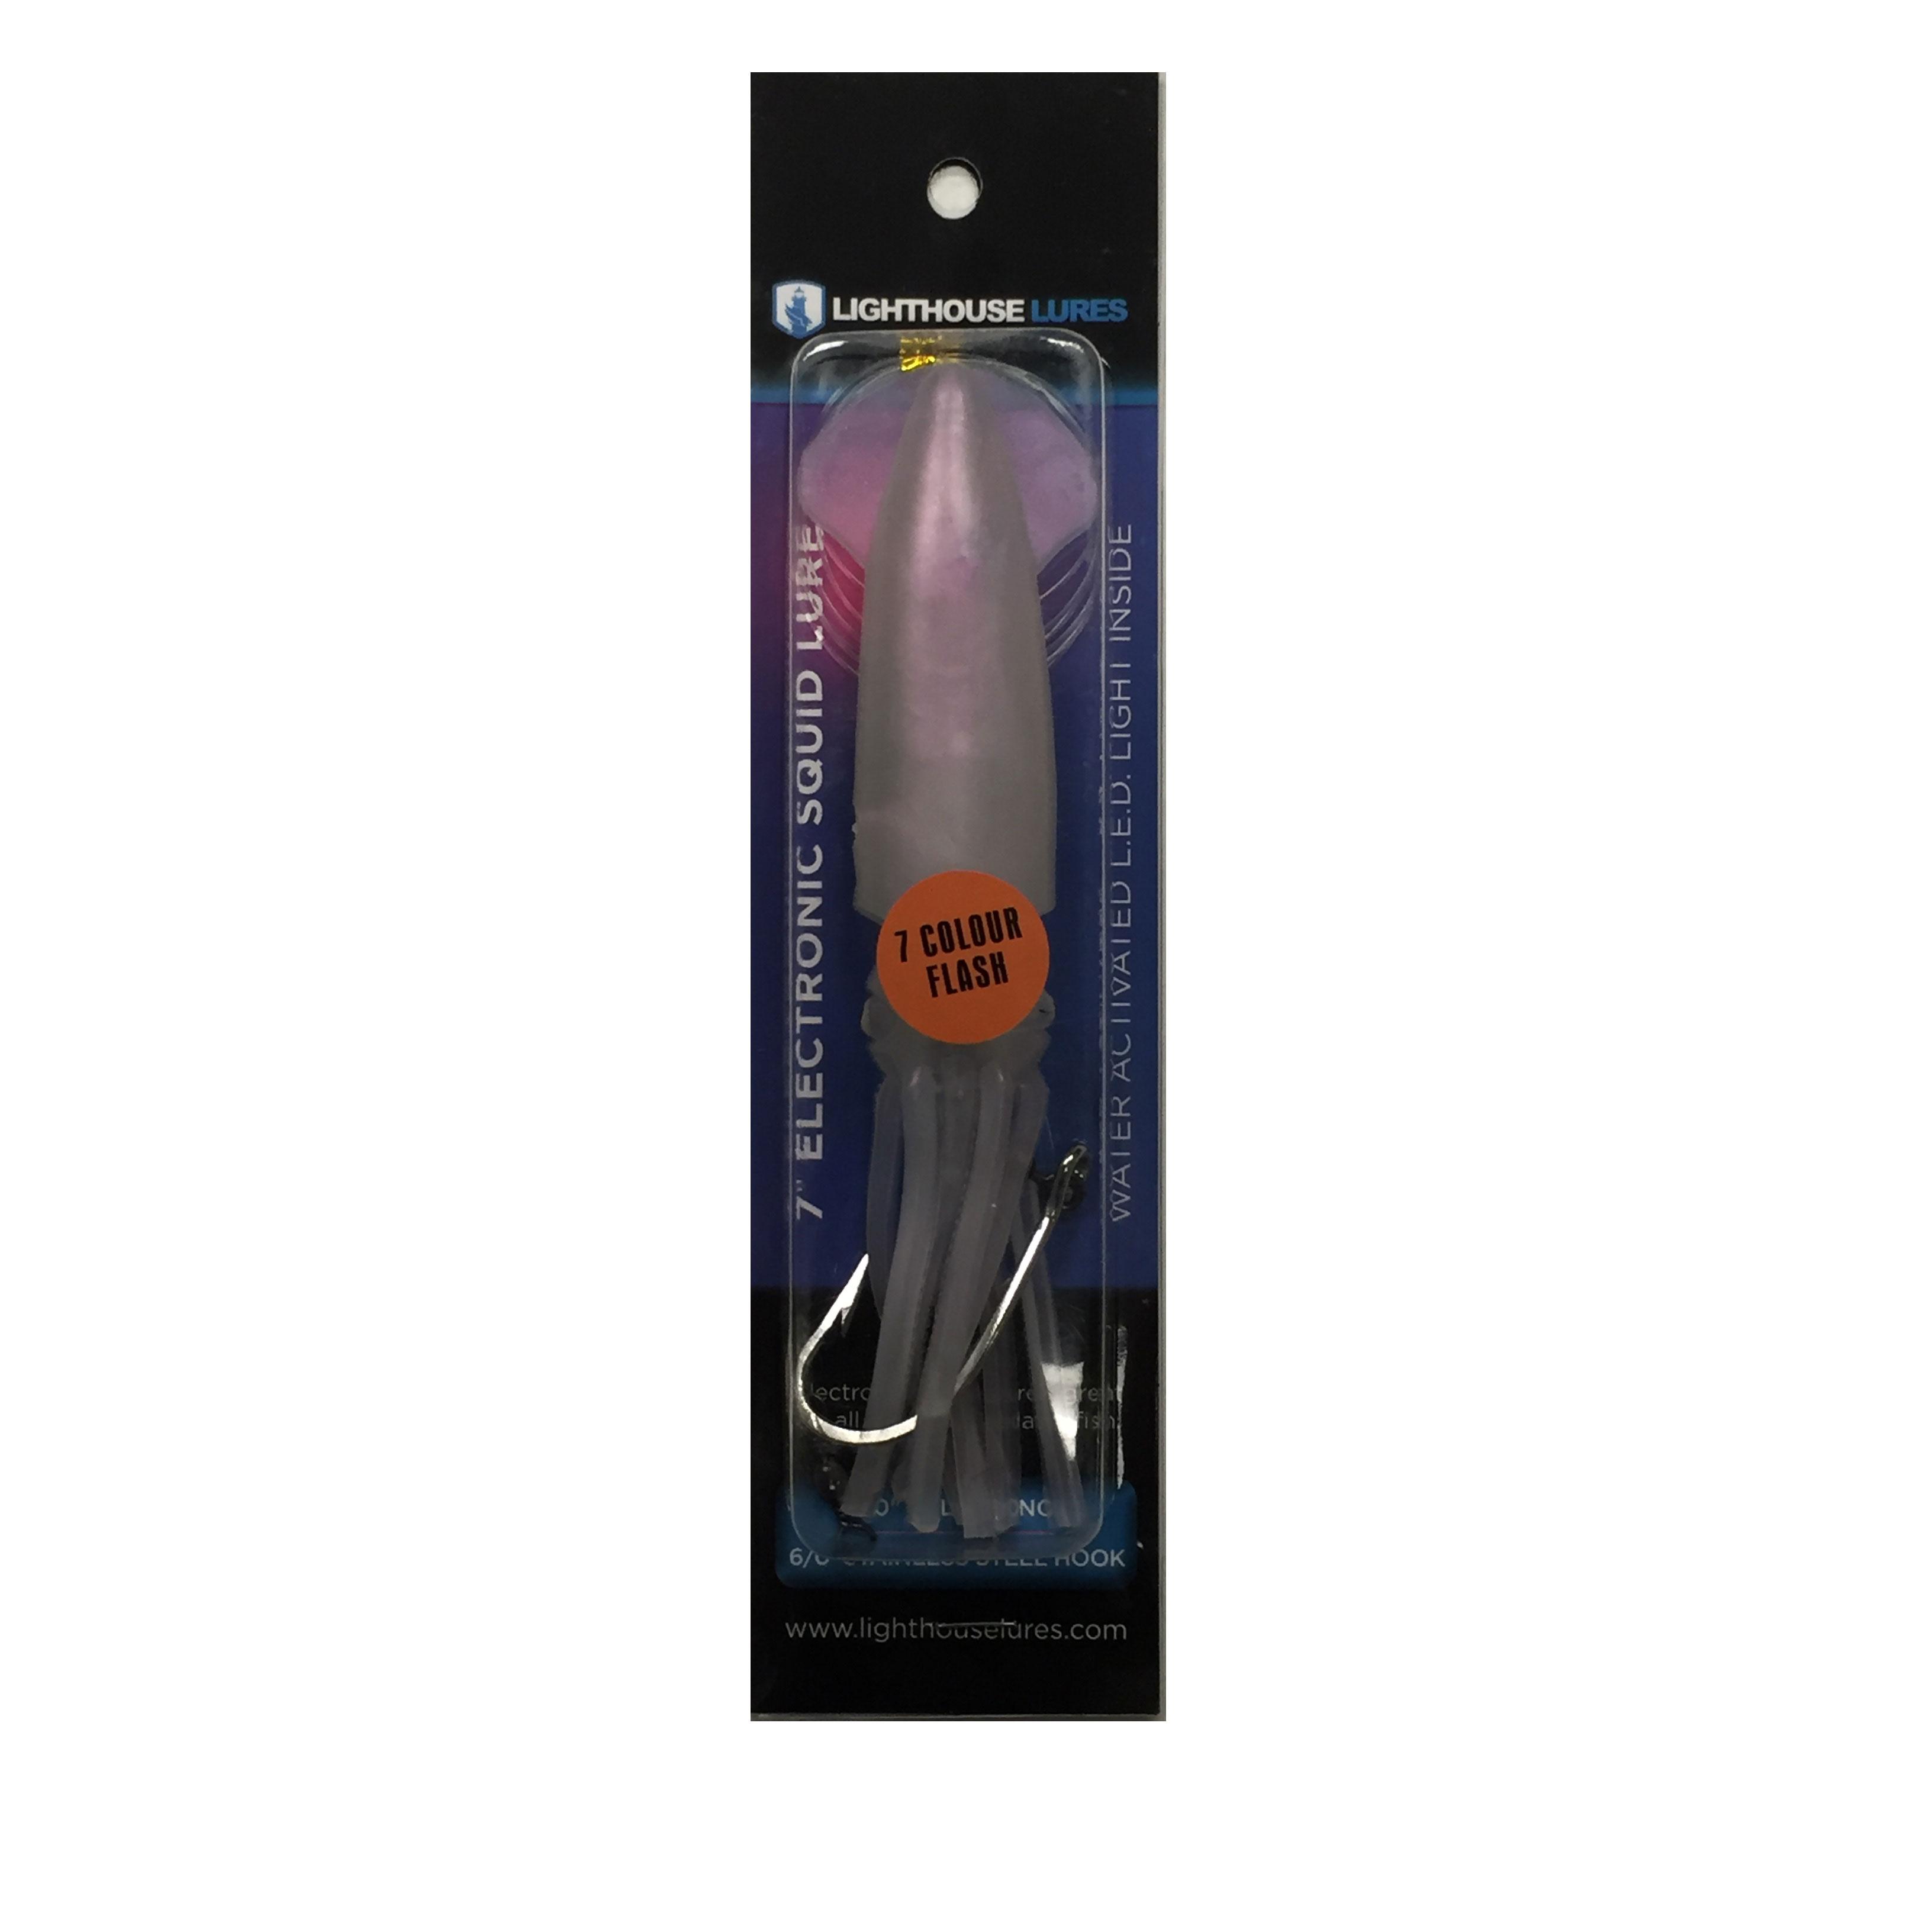 Lighthouse Lures 7 LED Squid Lure - The Wicked White